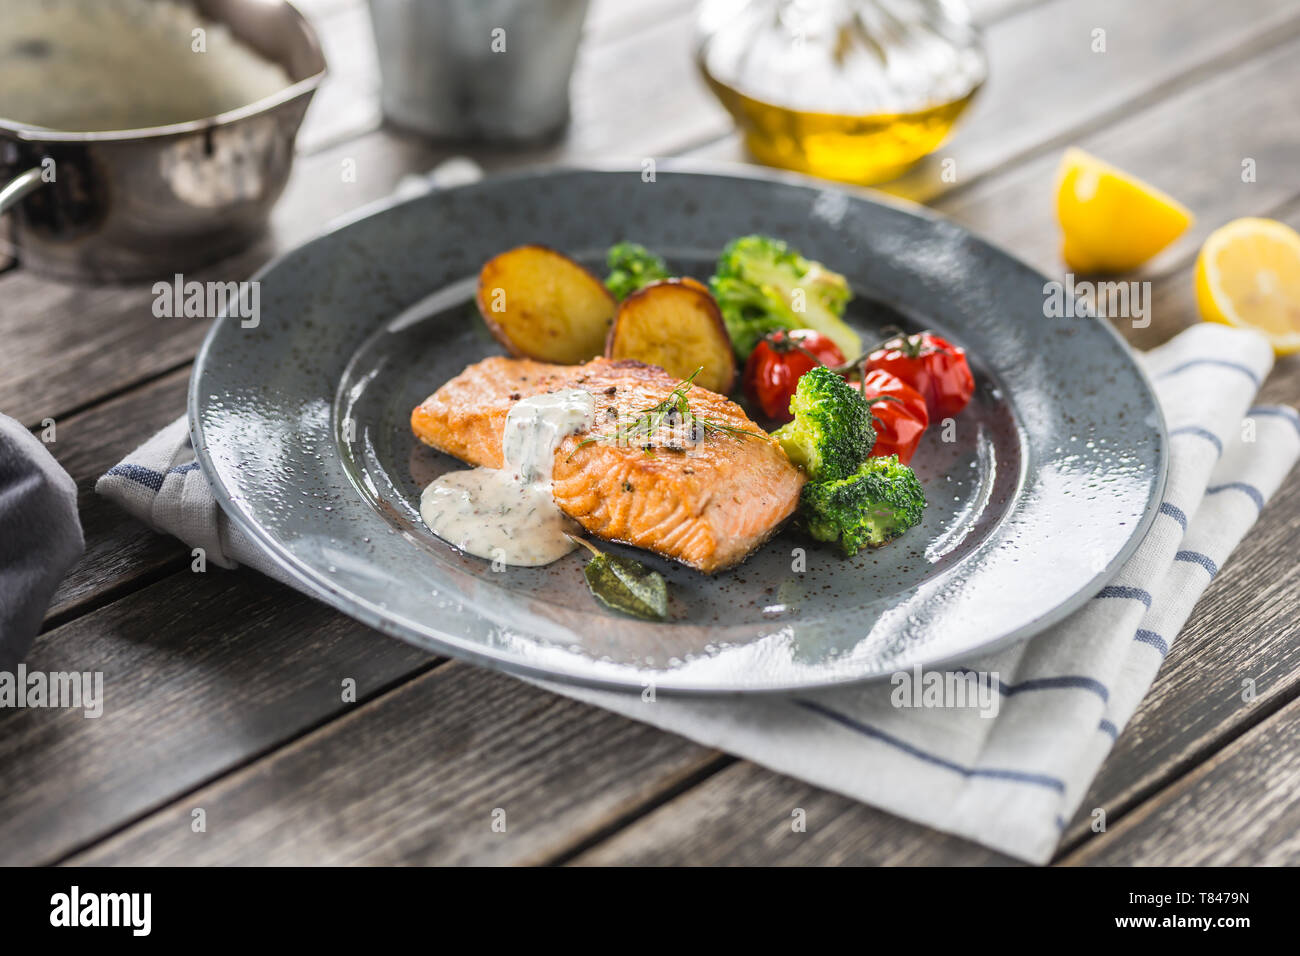 Roasted salmon fillet broccoli tomatoes and fried potatoes with dill cream sauce Stock Photo